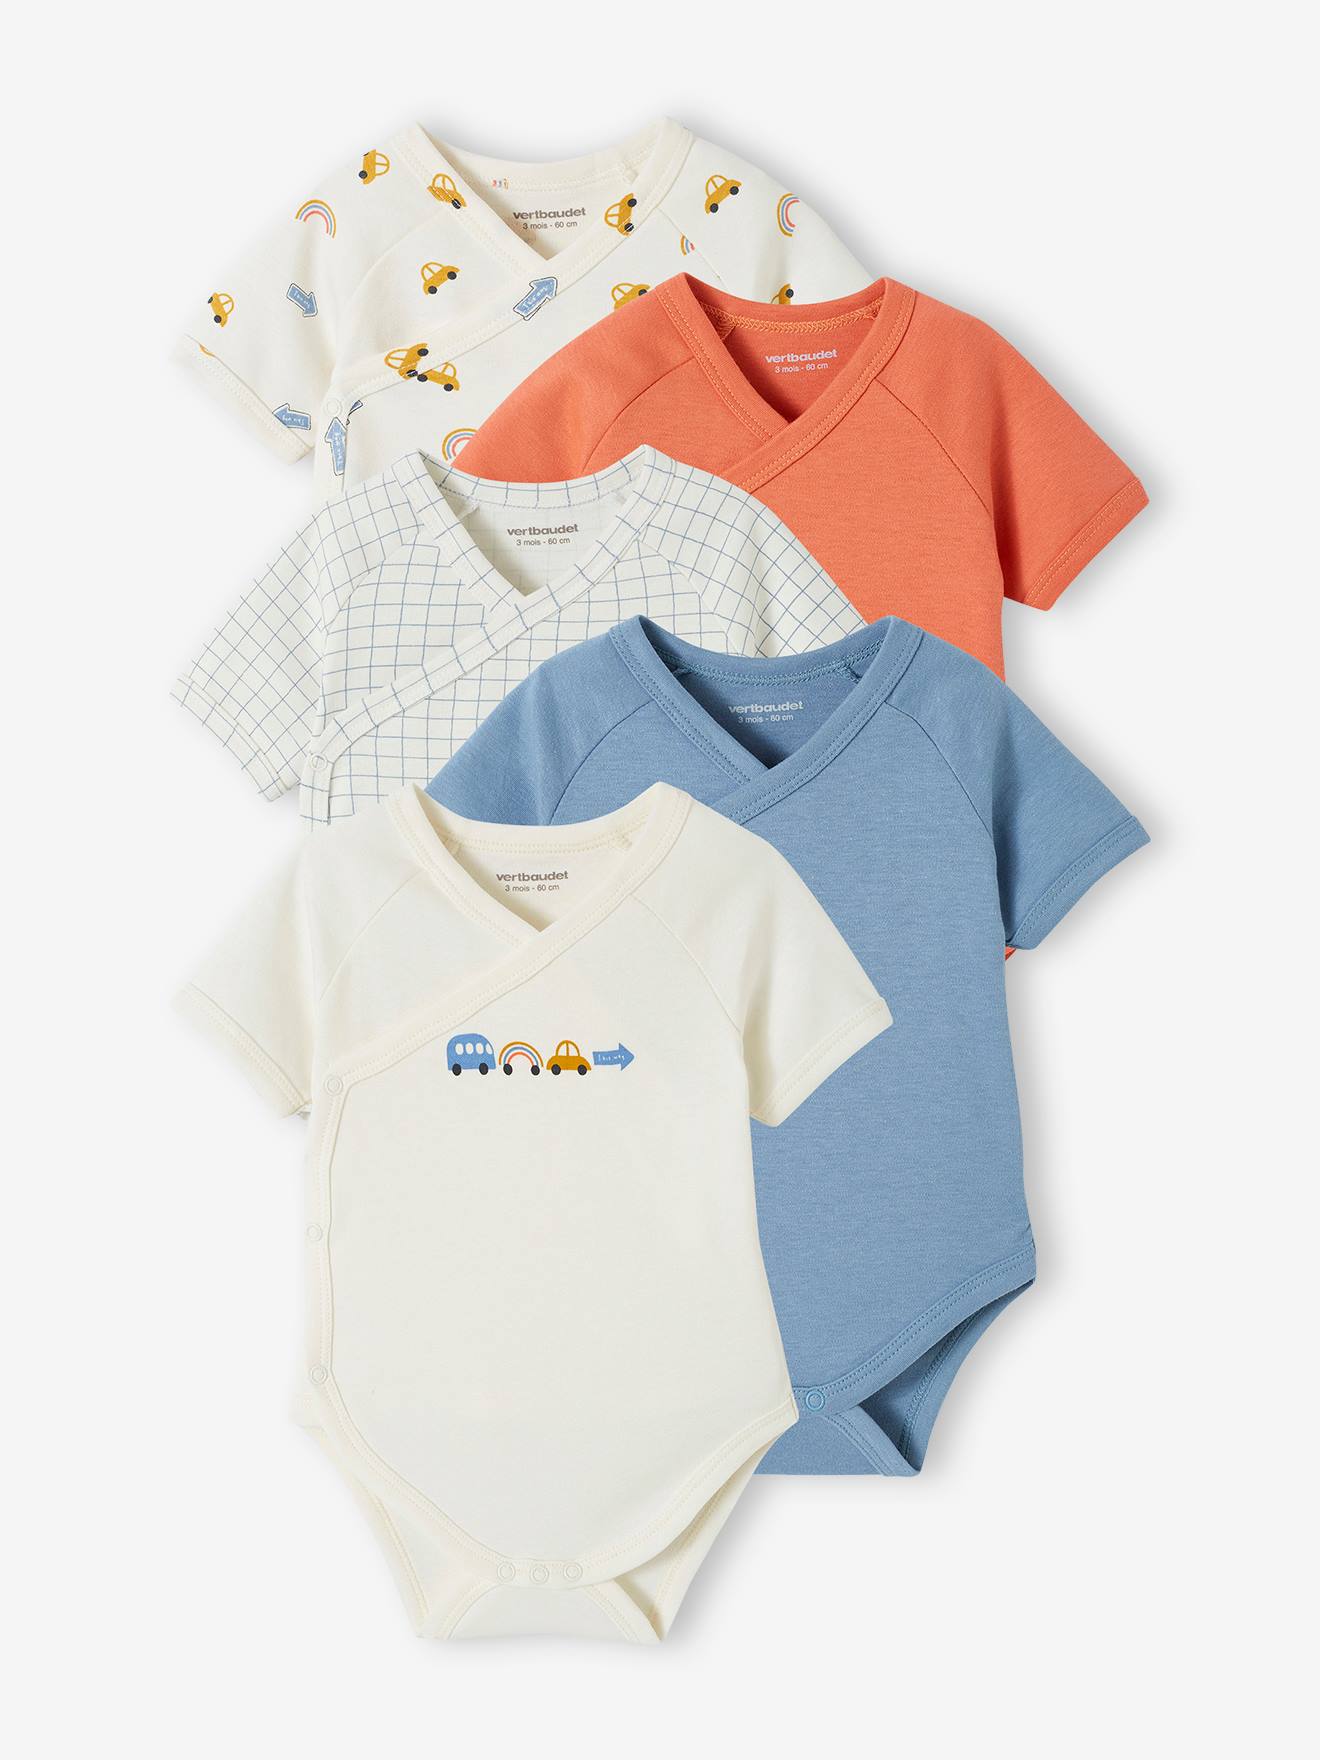 Pack of 5 "Cars" Bodysuits in Organic Cotton for Newborns sky blue